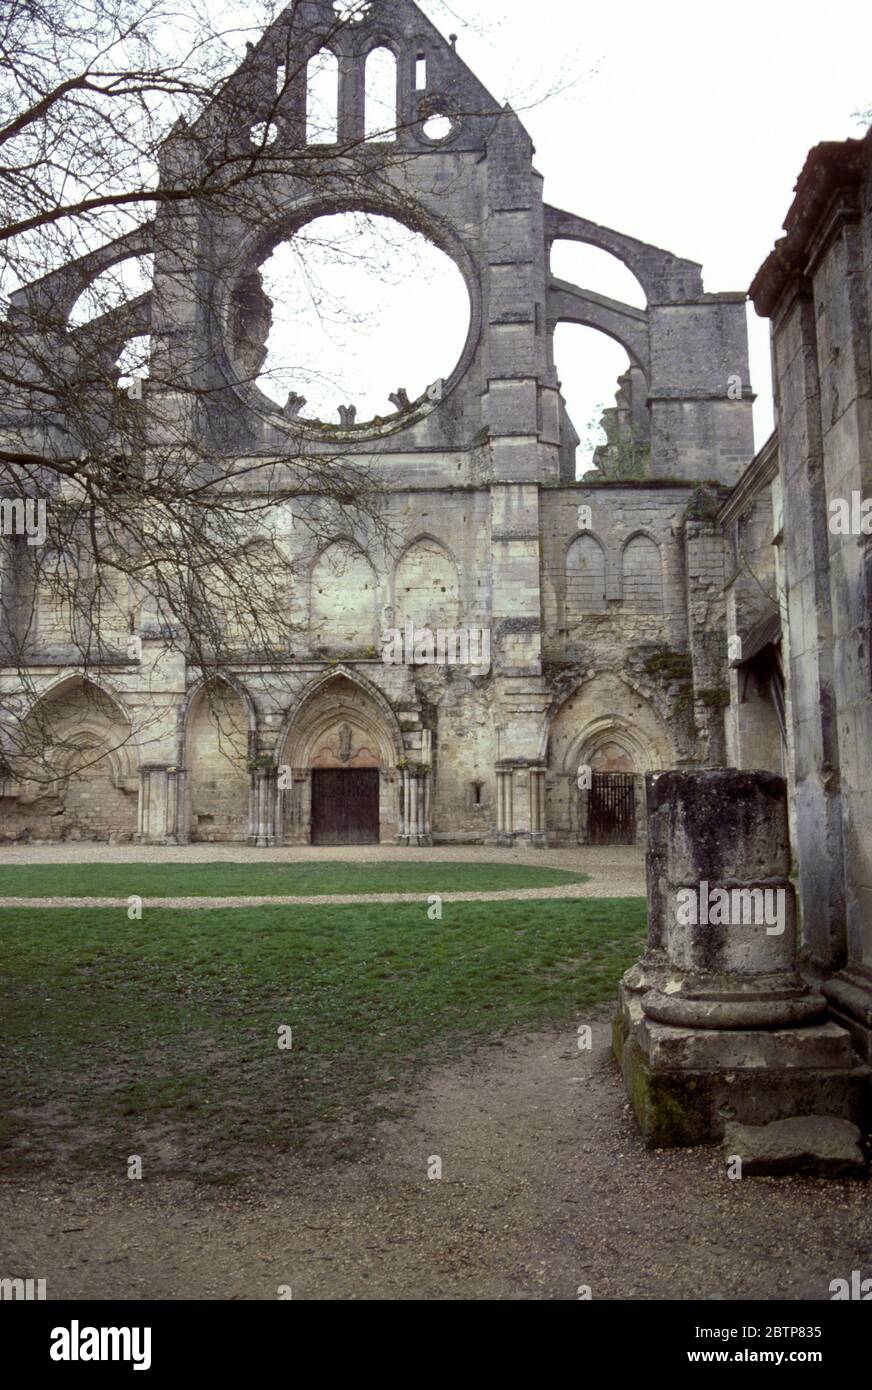 Longpont Abbey, formerly a Cistercian monastery, in present-day Longpont, Aisne, France pictured in 1974 Stock Photo